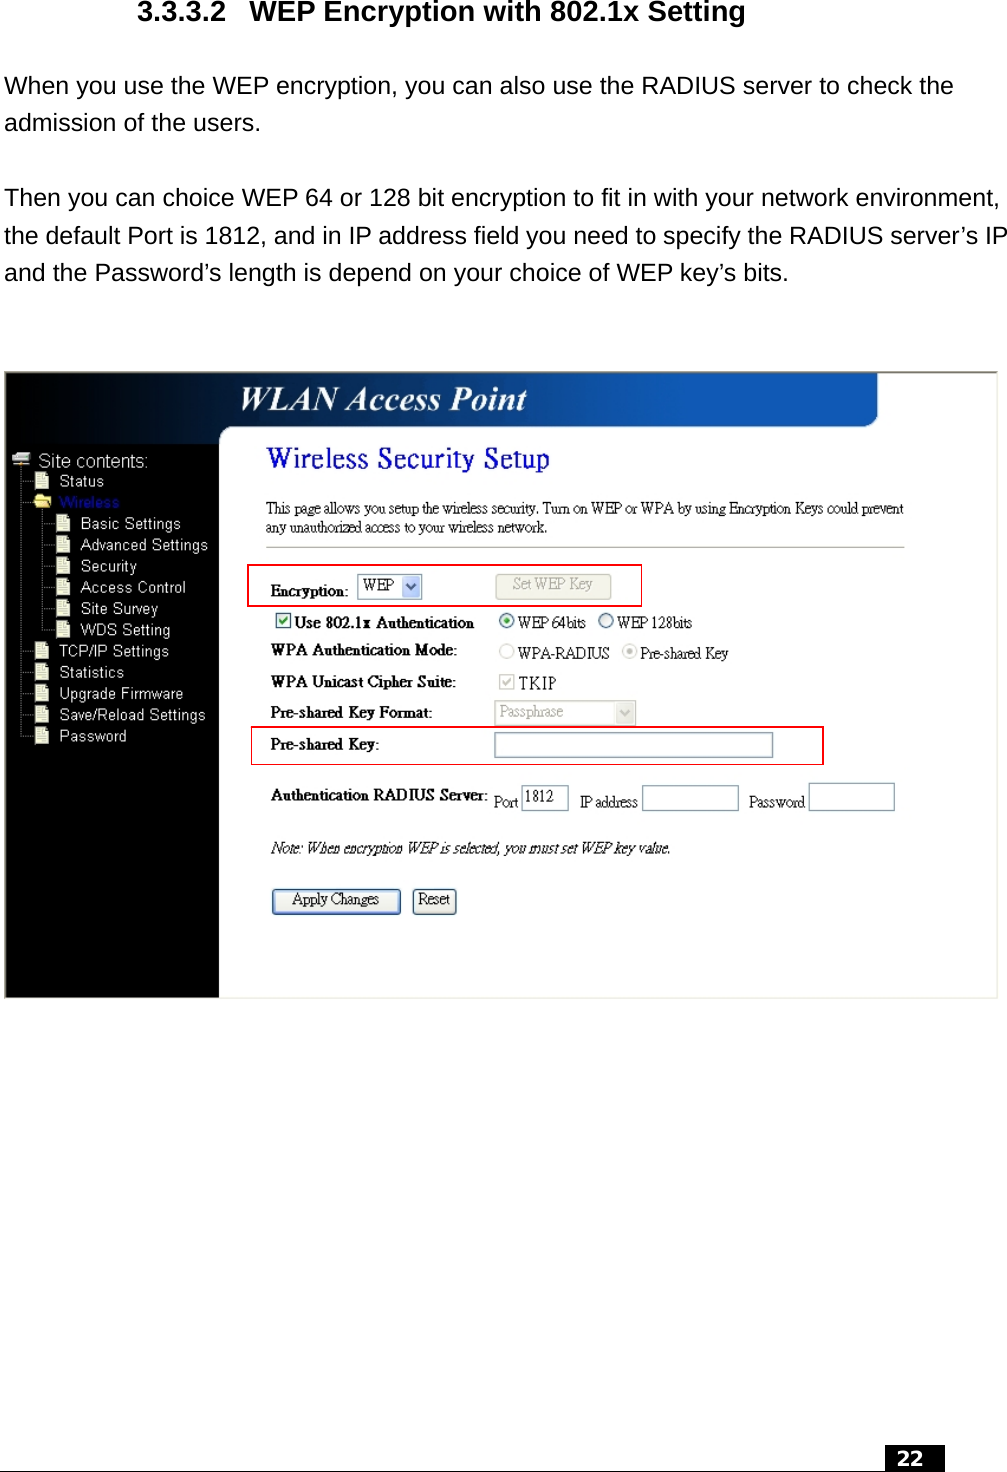 3.3.3.2  WEP Encryption with 802.1x Setting When you use the WEP encryption, you can also use the RADIUS server to check the admission of the users.  Then you can choice WEP 64 or 128 bit encryption to fit in with your network environment, the default Port is 1812, and in IP address field you need to specify the RADIUS server’s IP and the Password’s length is depend on your choice of WEP key’s bits.      22  